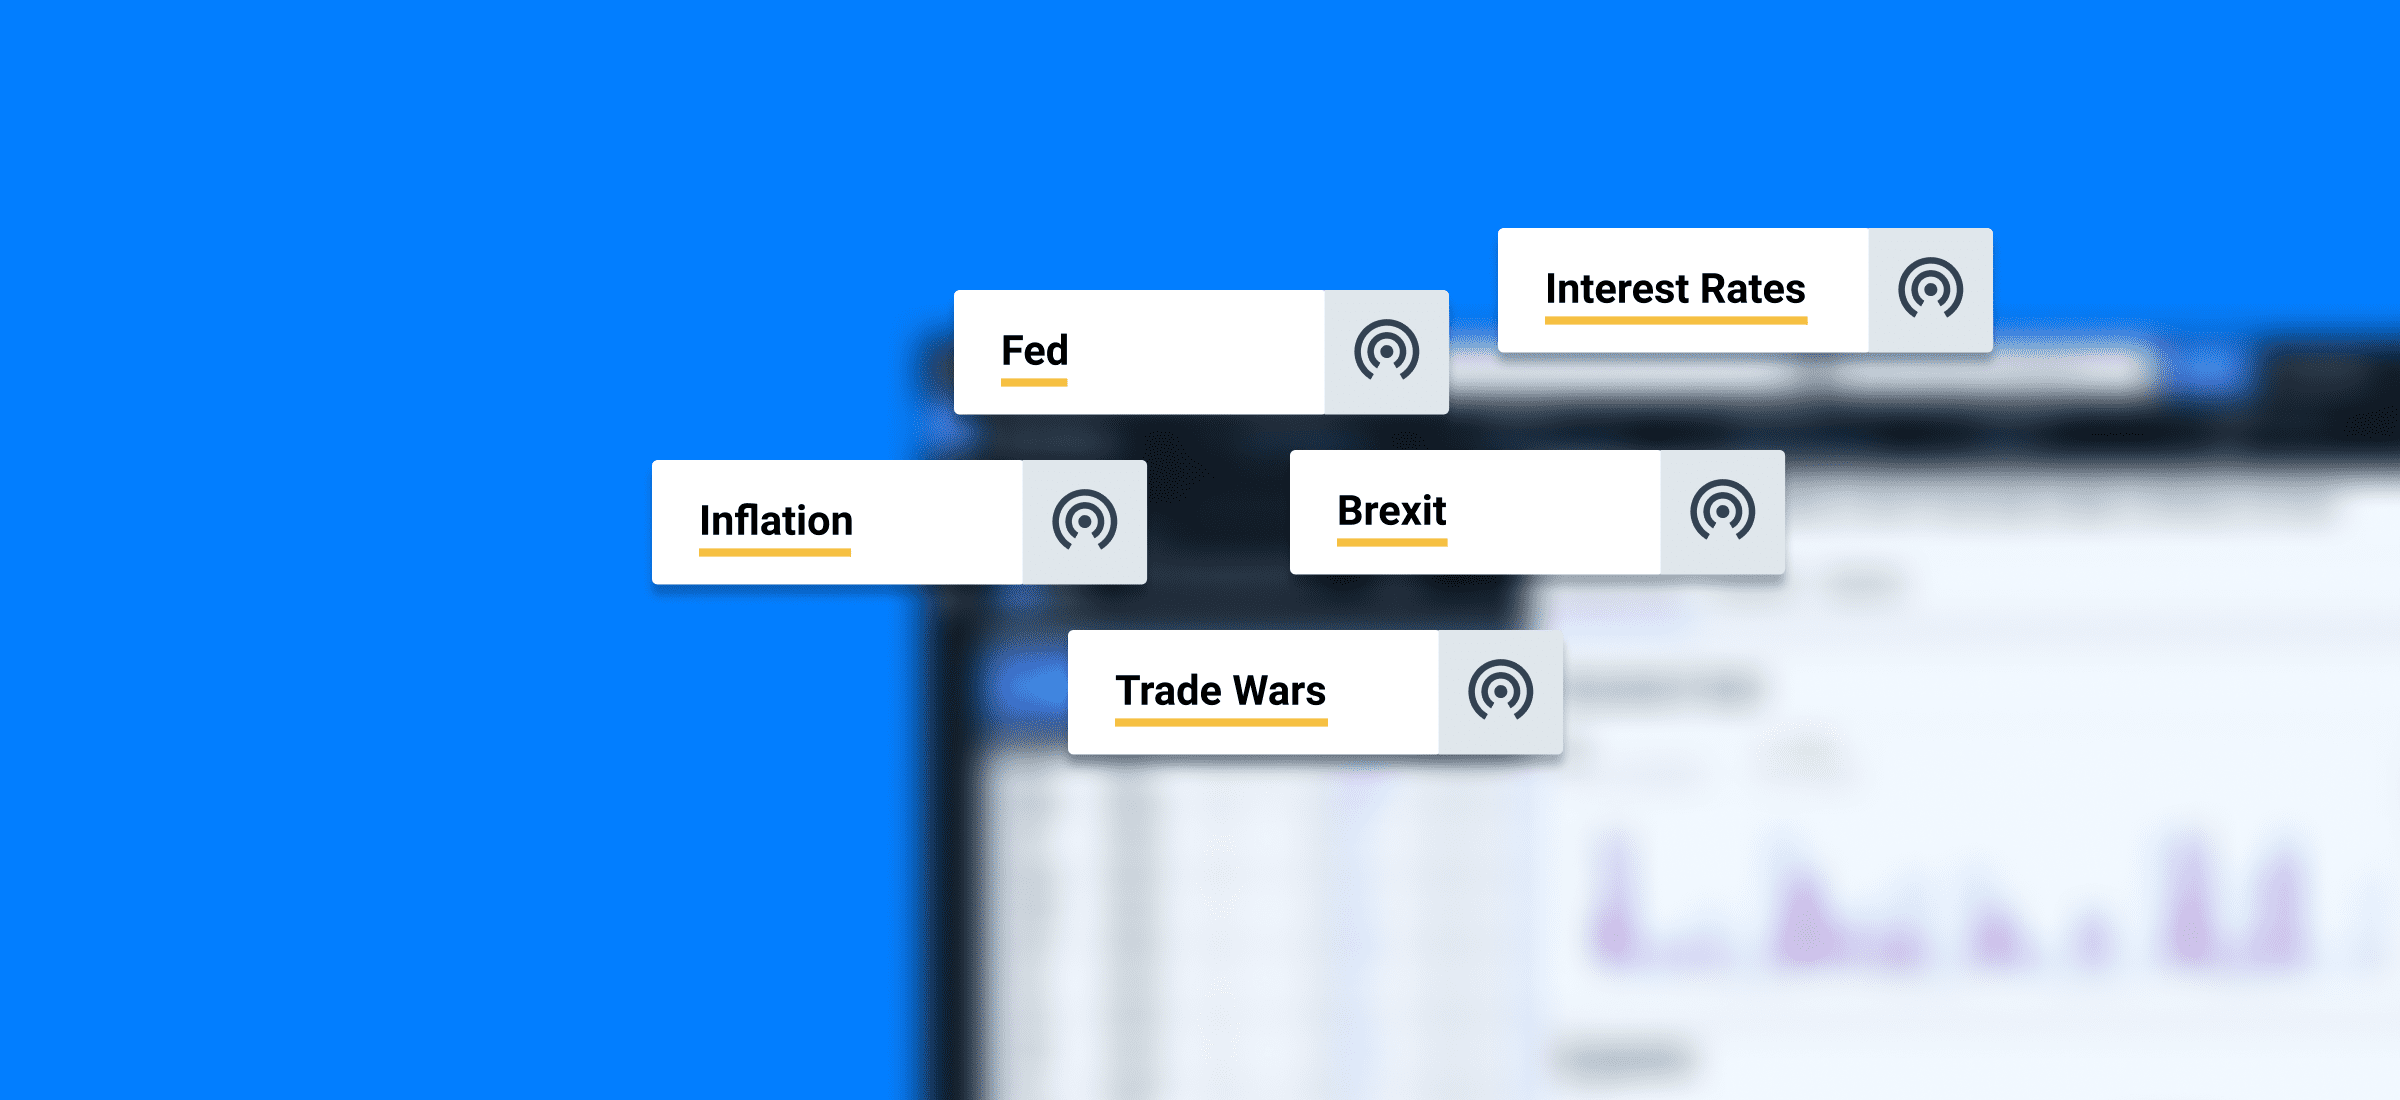 Inflation, Fed, Brexit, Interest Rates and Trade Wars tags